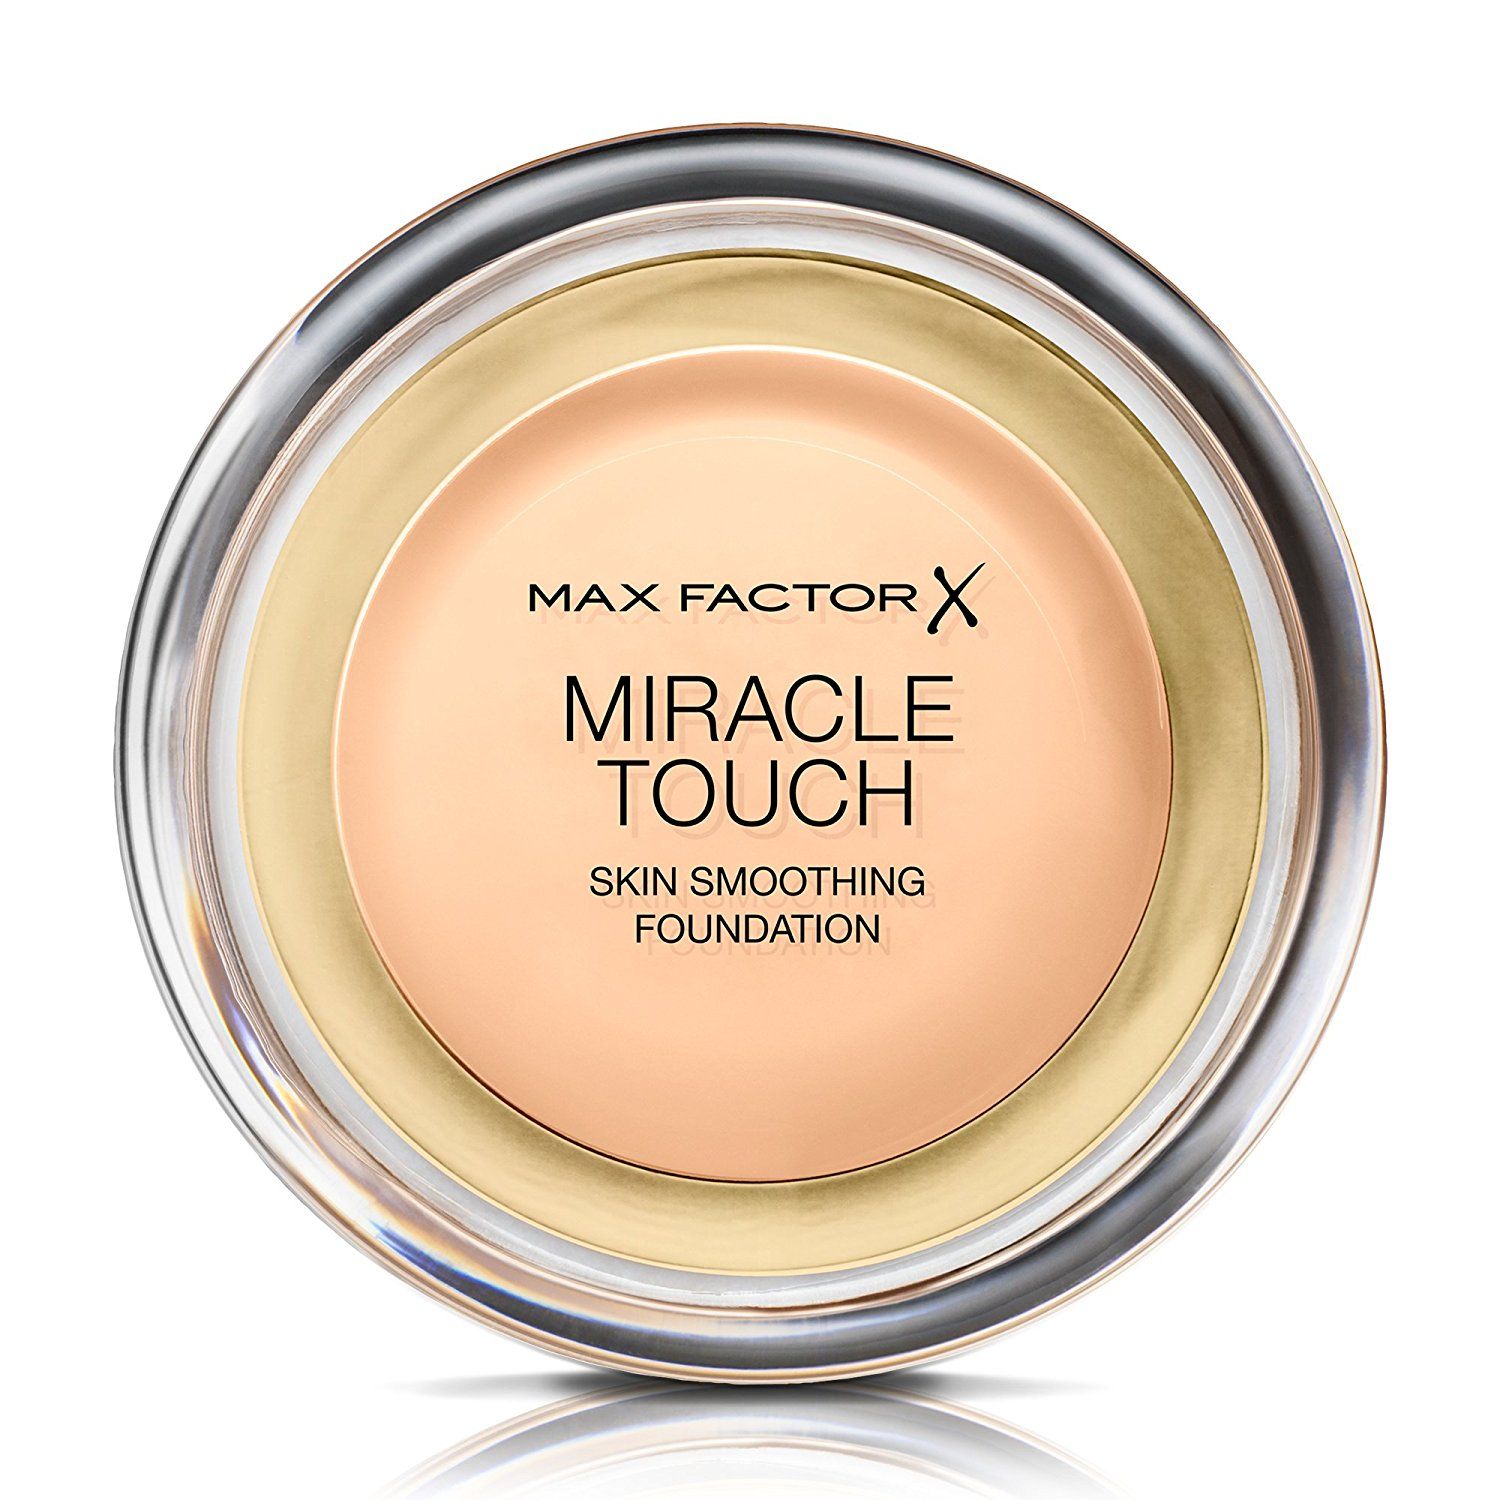 New Miracle Touch Skin Smoothing Foundation's solid to liquid formula melts and glides across uneven skin for a miraculous smooth finish. The formula melts at your touch and glides over skin. Smoothes and covers uneven skin textures. Foundation with full coverage for a miracle smooth finish. Sponge applicator concealed in lid.